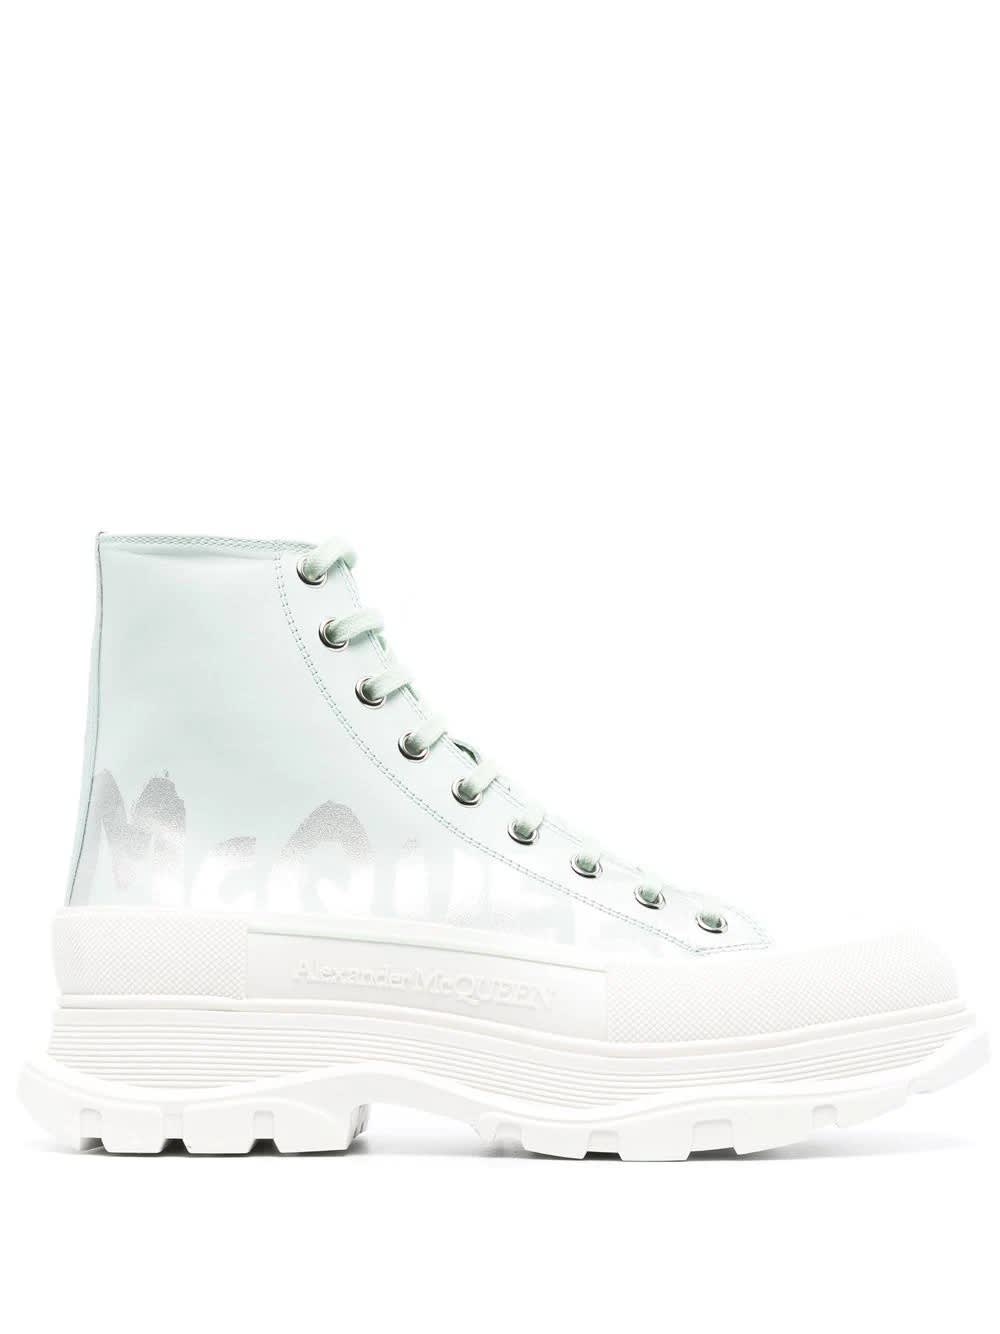 White Tread Slick Boots With Mint Green Shade